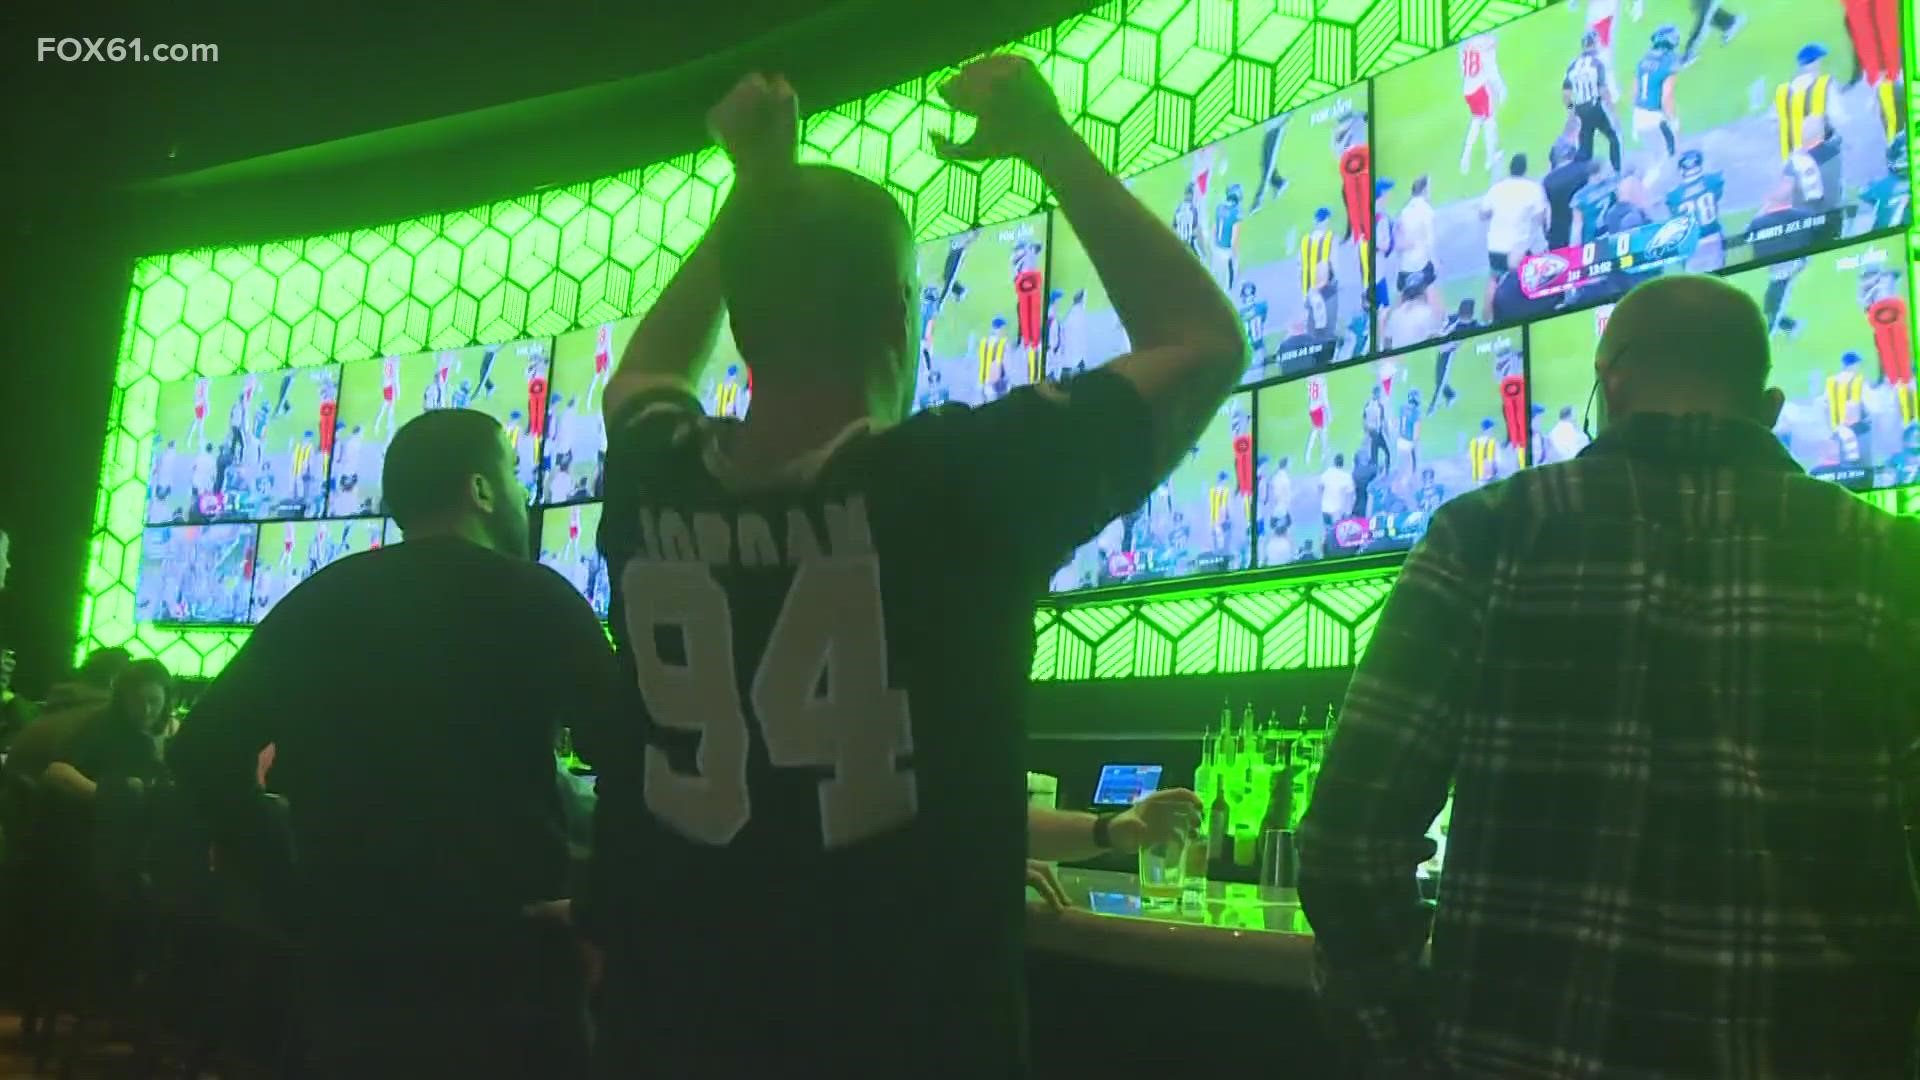 Kansas City won Tonight's Super Bowl and people are hoping to score big.